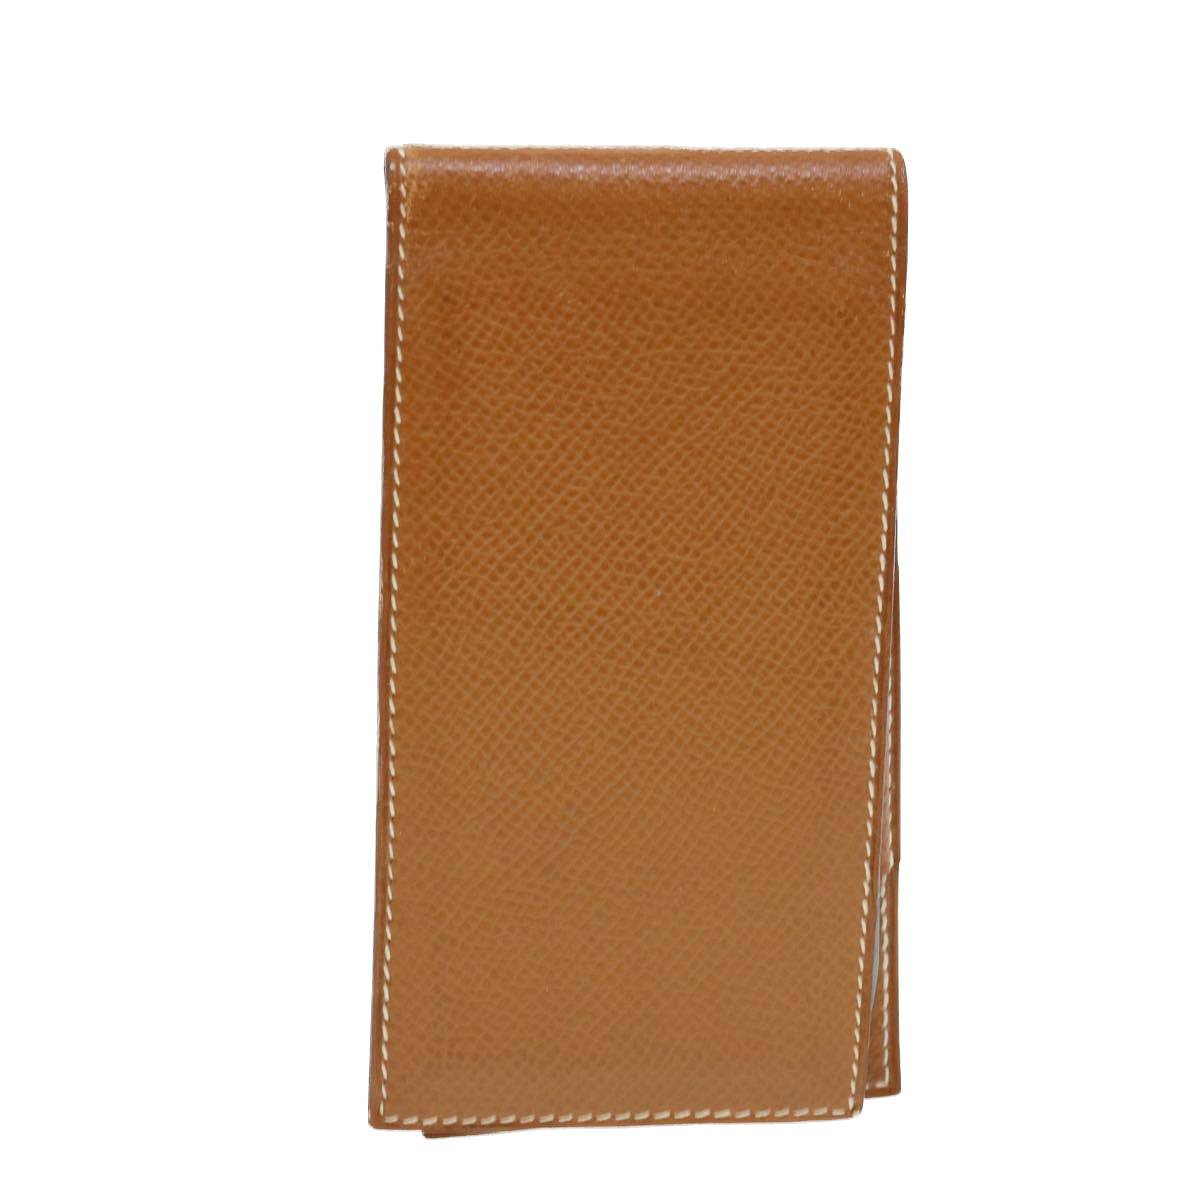 HERMES Memo Holder Day Planner Cover Leather Brown Auth ar9271B